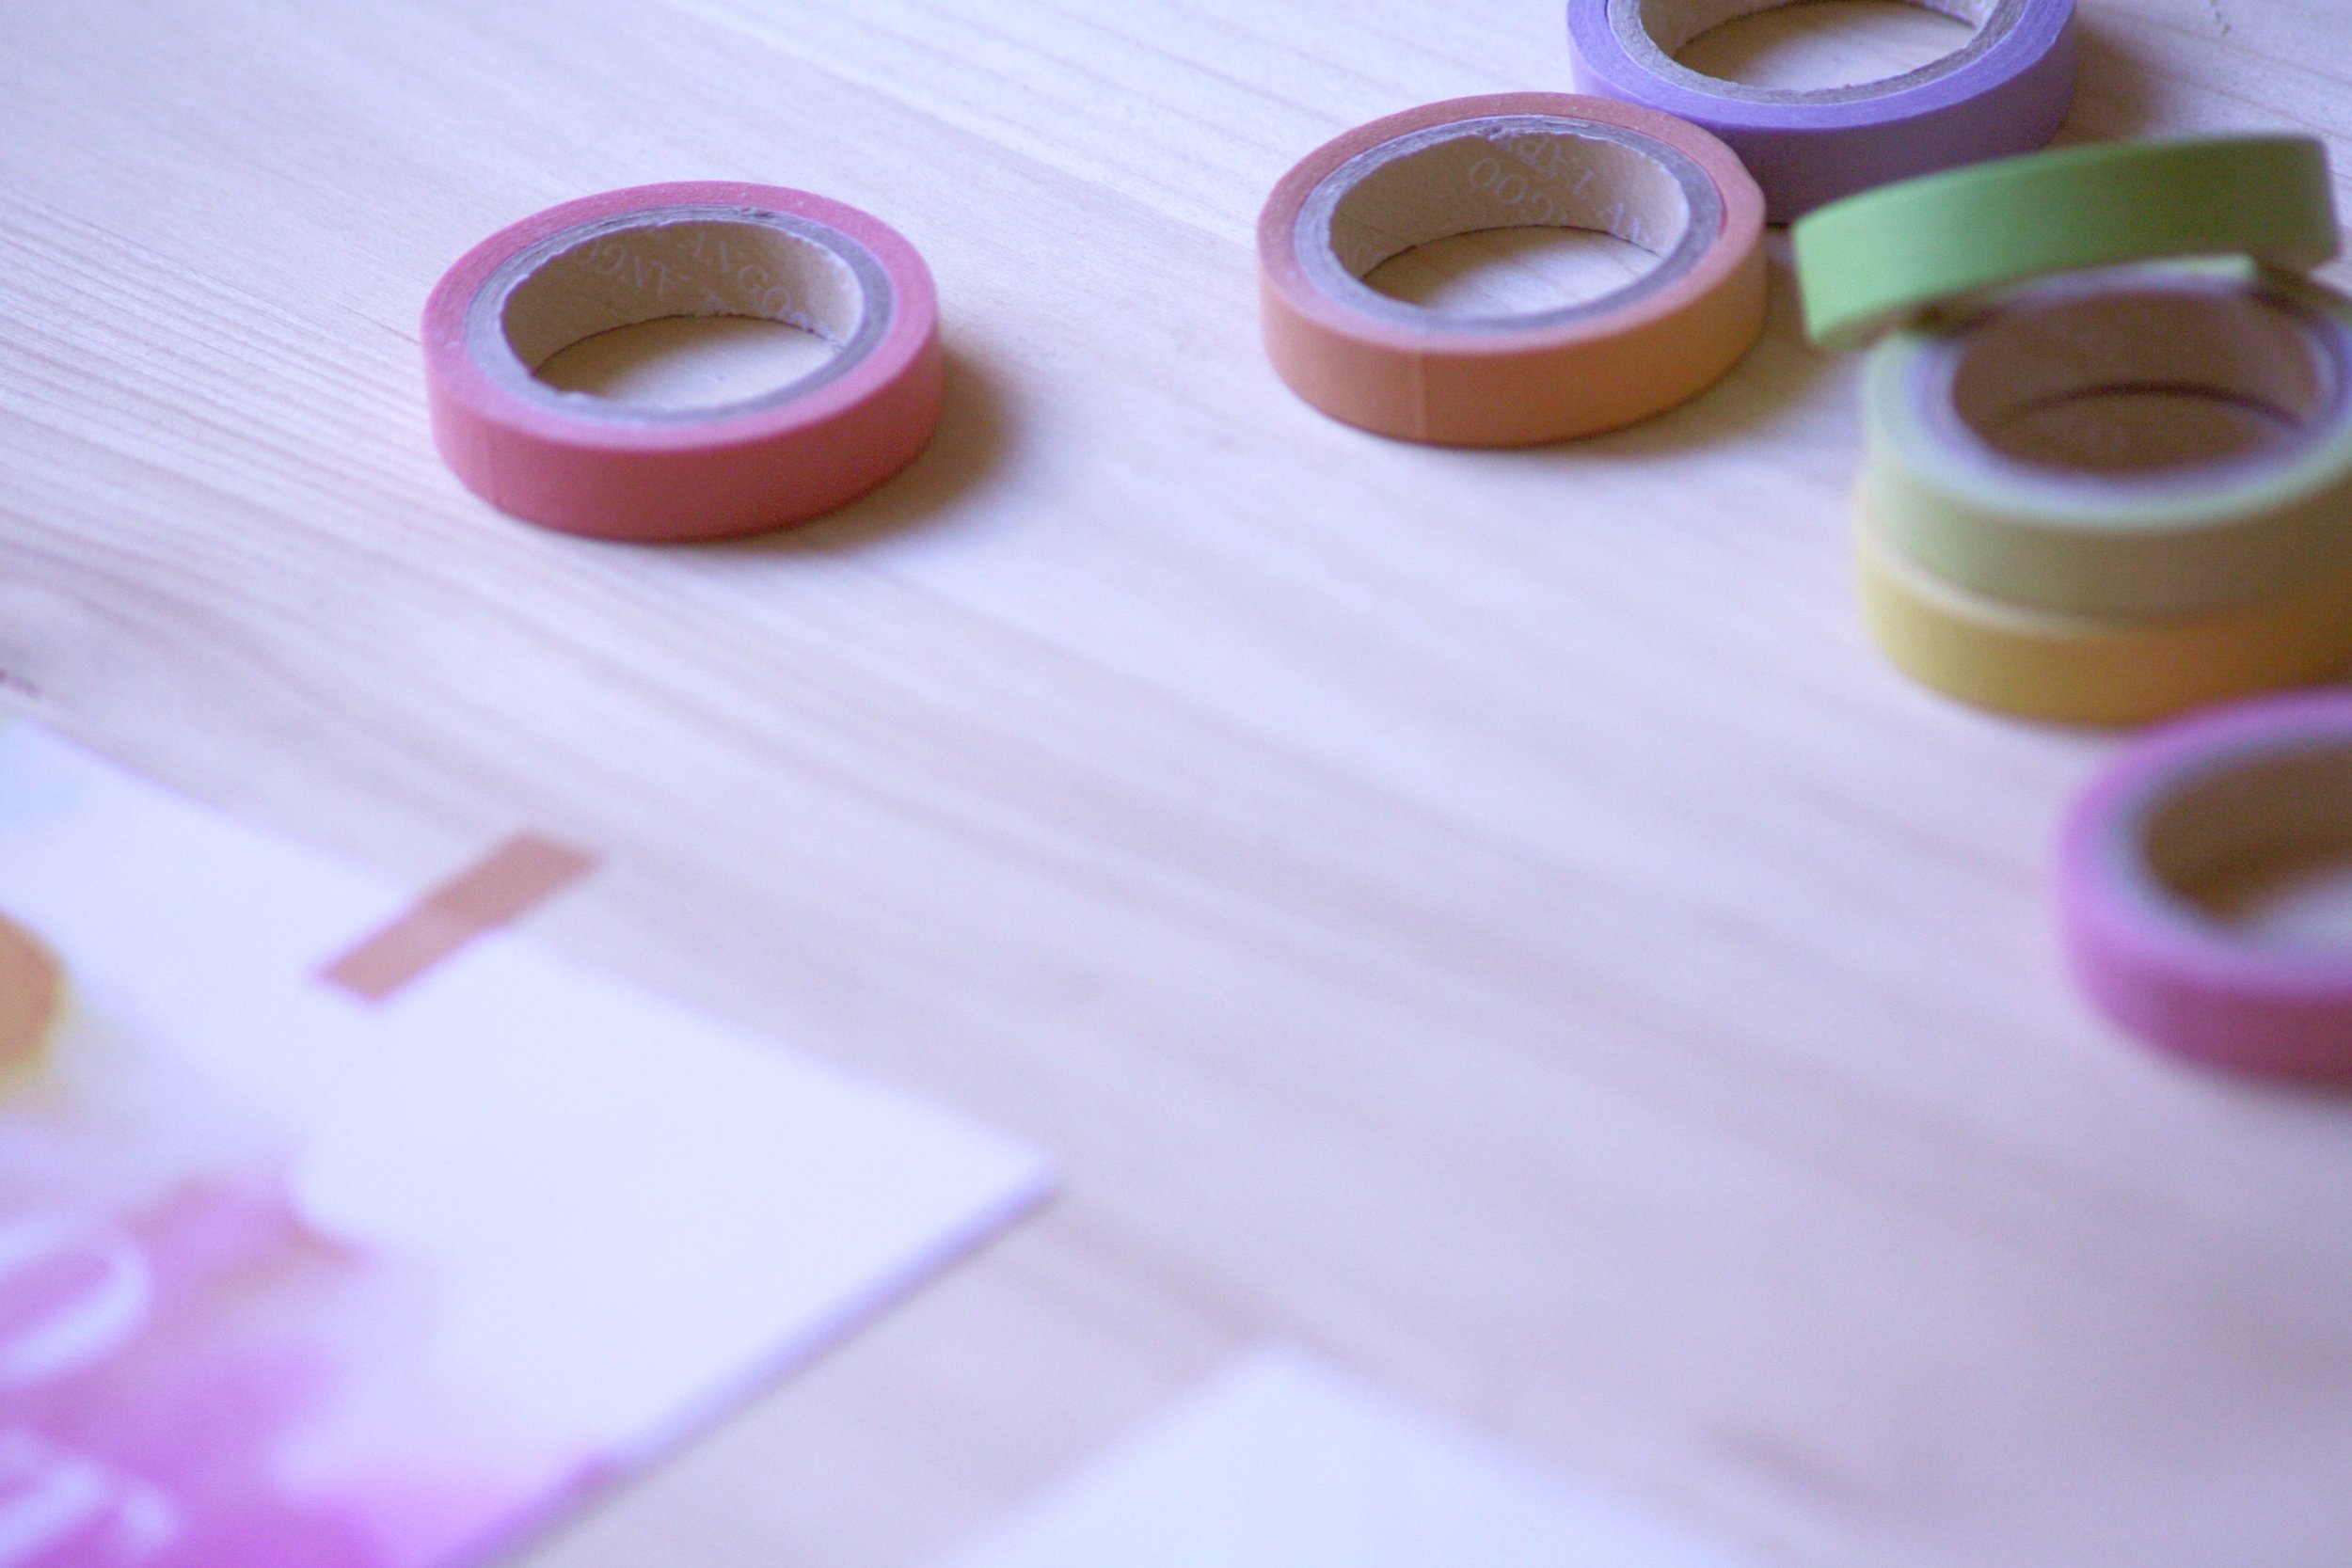 5 Brilliant Things You Can Do With Washi Tape